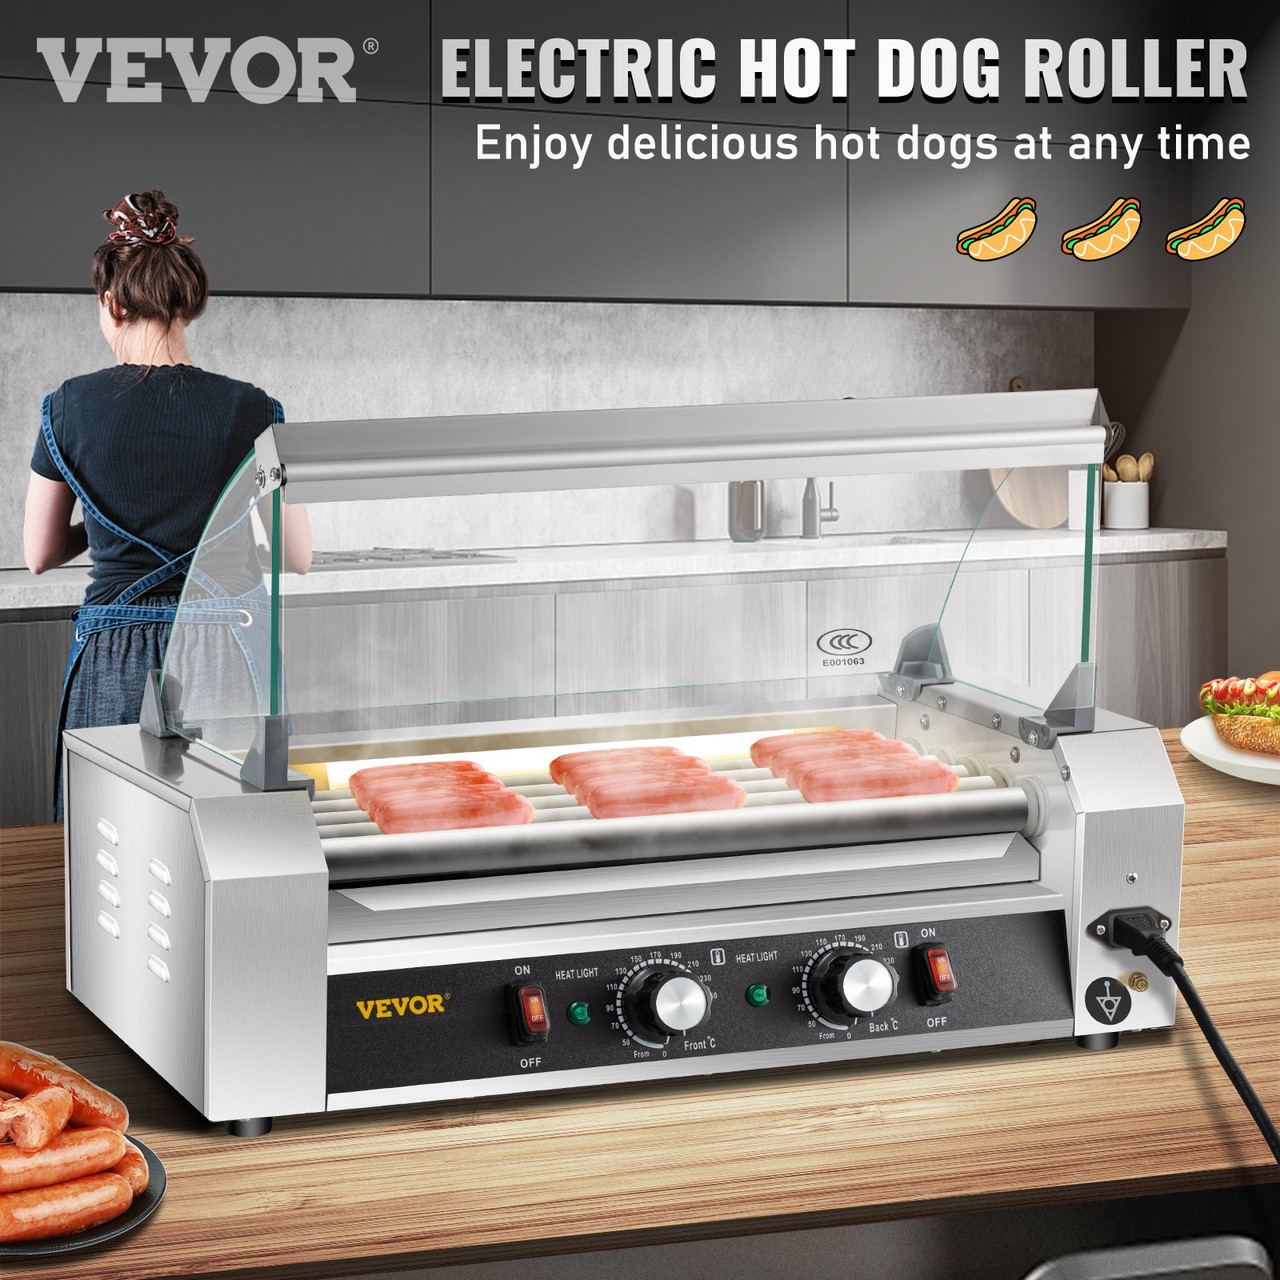 Hot Dog Roller, 12 Hot Dog Capacity 5 Rollers, 750W Stainless Steel Cook Warmer Machine with Cover & Dual Temp Control, LED Light & Detachable Drip Tray, Sausage Grill Cooker for Kitchen Canteen